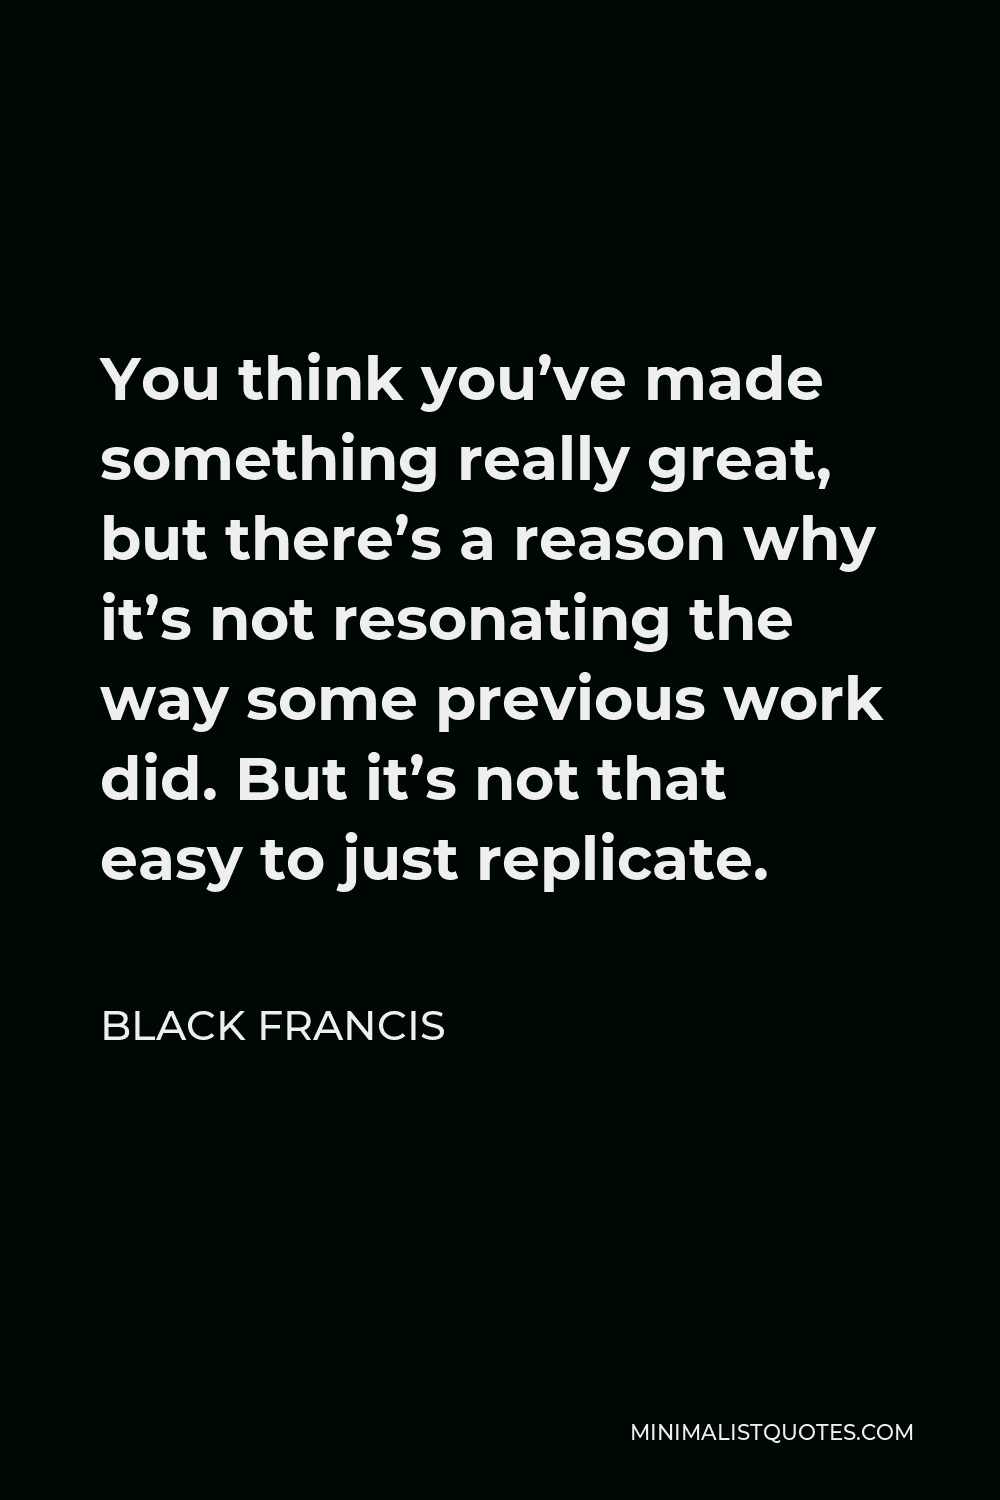 Black Francis Quote - You think you’ve made something really great, but there’s a reason why it’s not resonating the way some previous work did. But it’s not that easy to just replicate.